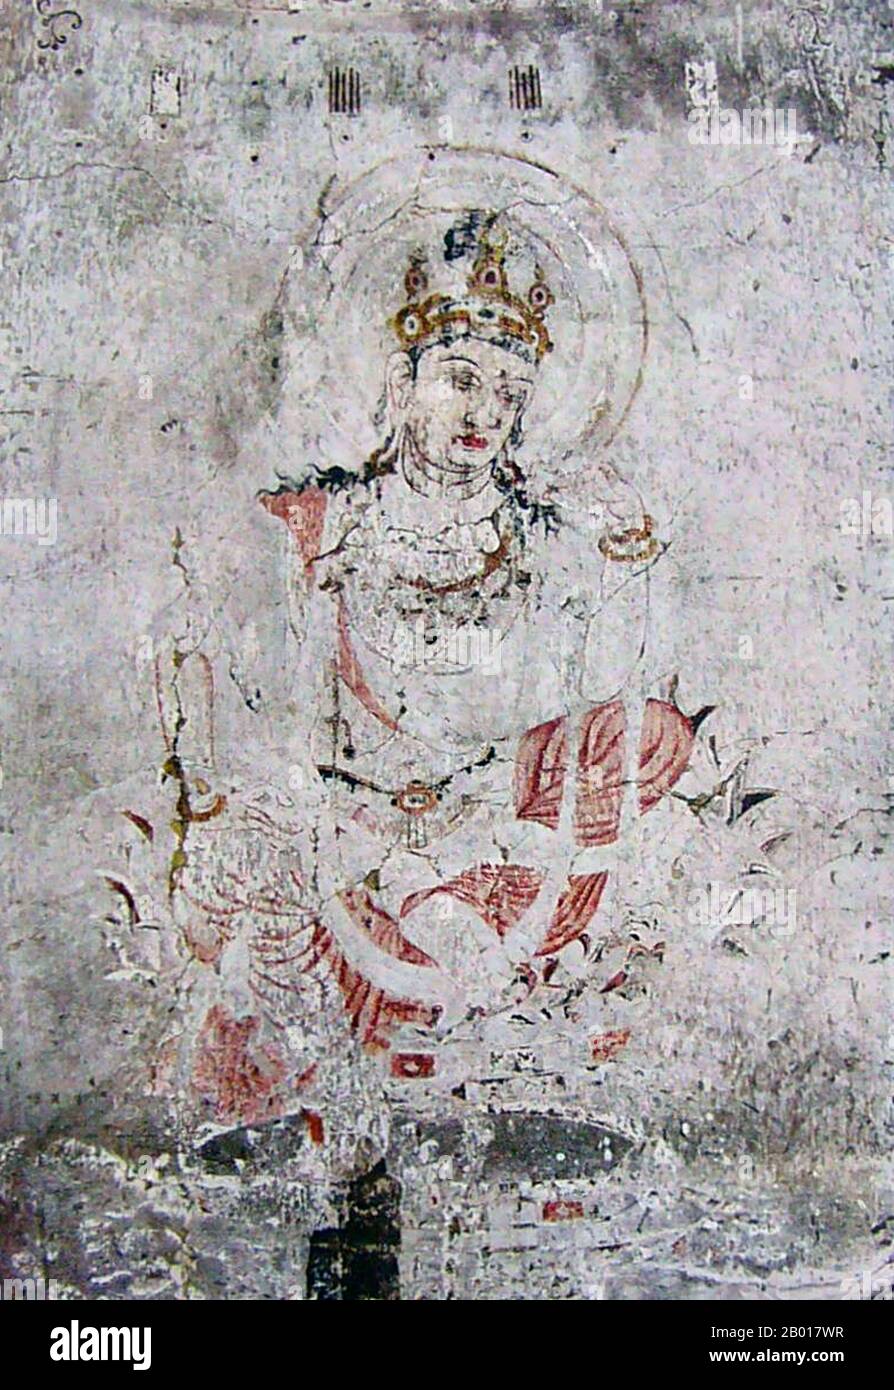 Japan: Lost Horyuji Temple fresco from a pre-1949 photograph: No.5 wall, Bodhisattva, detail.  Hōryū-ji (Temple of the Flourishing Law) is a Buddhist temple in Ikaruga, Nara Prefecture, Japan. Its full name is Hōryū Gakumonji, or Learning Temple of the Flourishing Law, the complex serving both as a seminary and a monastery.  In 1993, Hōryū-ji was inscribed as a UNESCO World Heritage Site under the name Buddhist Monuments in the Hōryū-ji Area. The Japanese government lists several of its structures, sculptures and artifacts as National Treasures. Stock Photo